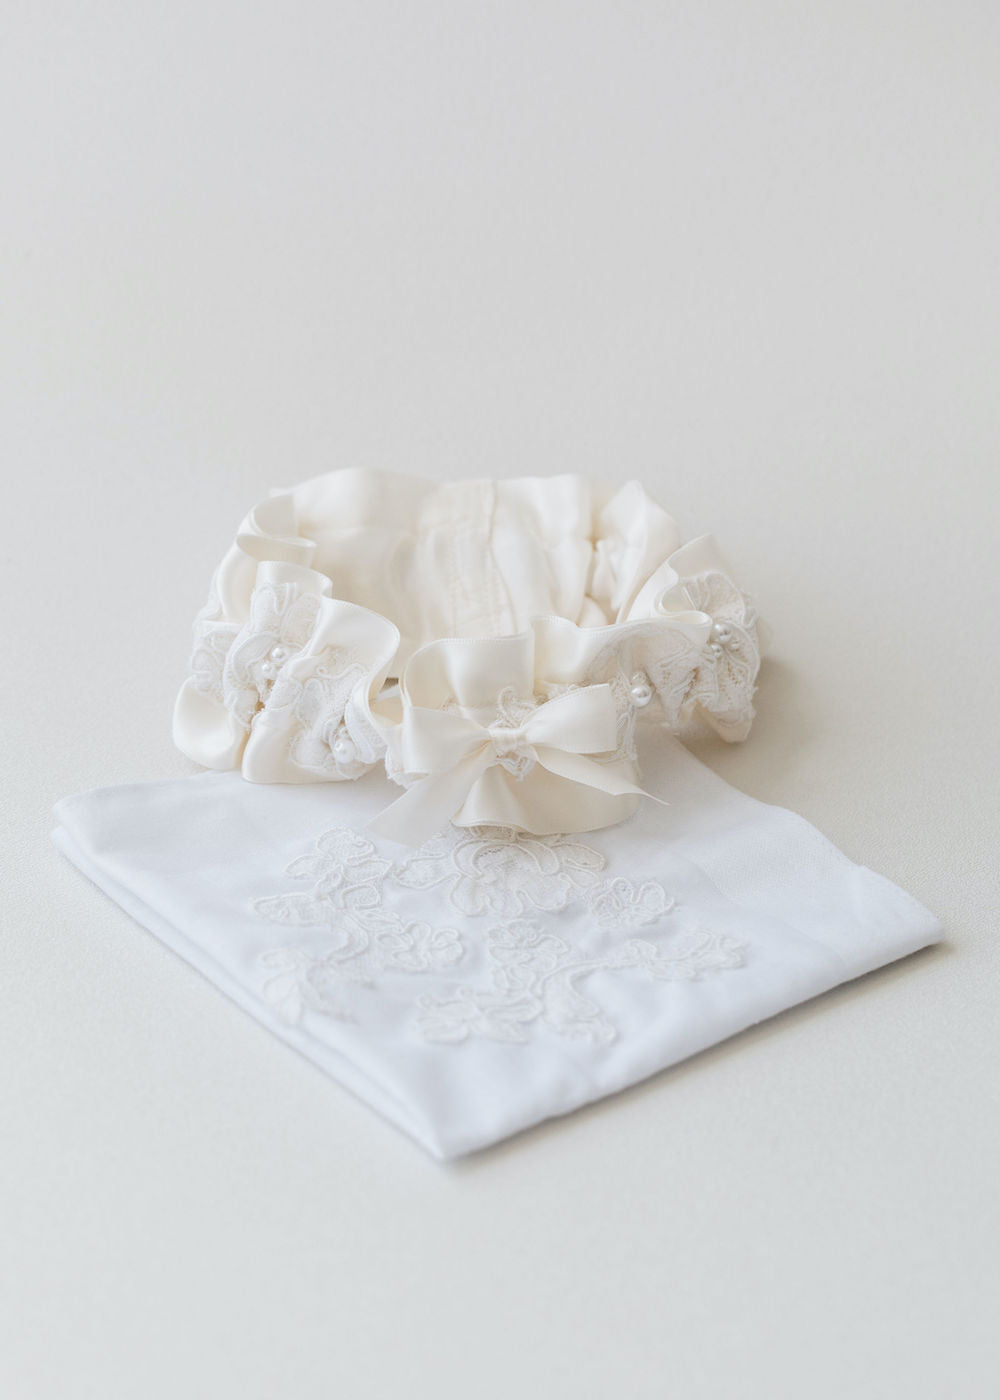 Lace & Pearls Wedding Garter From Mother's Wedding Dress